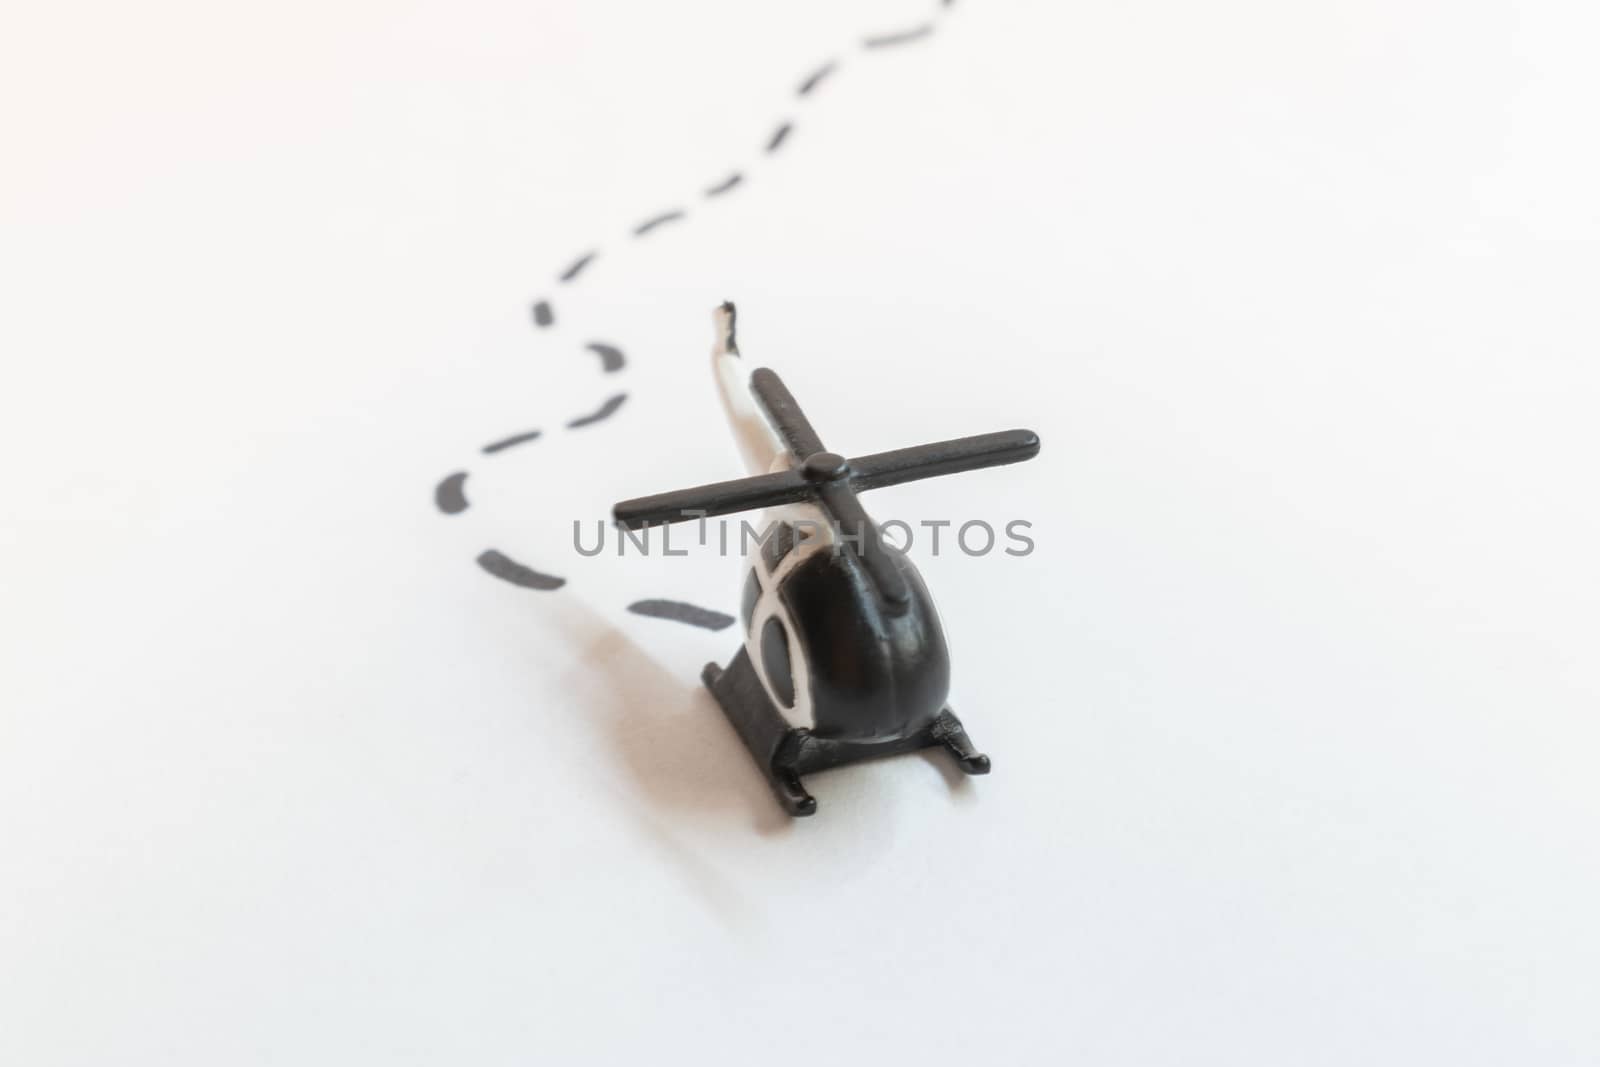 Small colorful helicopter toys isolated on a white background - air travel by helicopter concept.